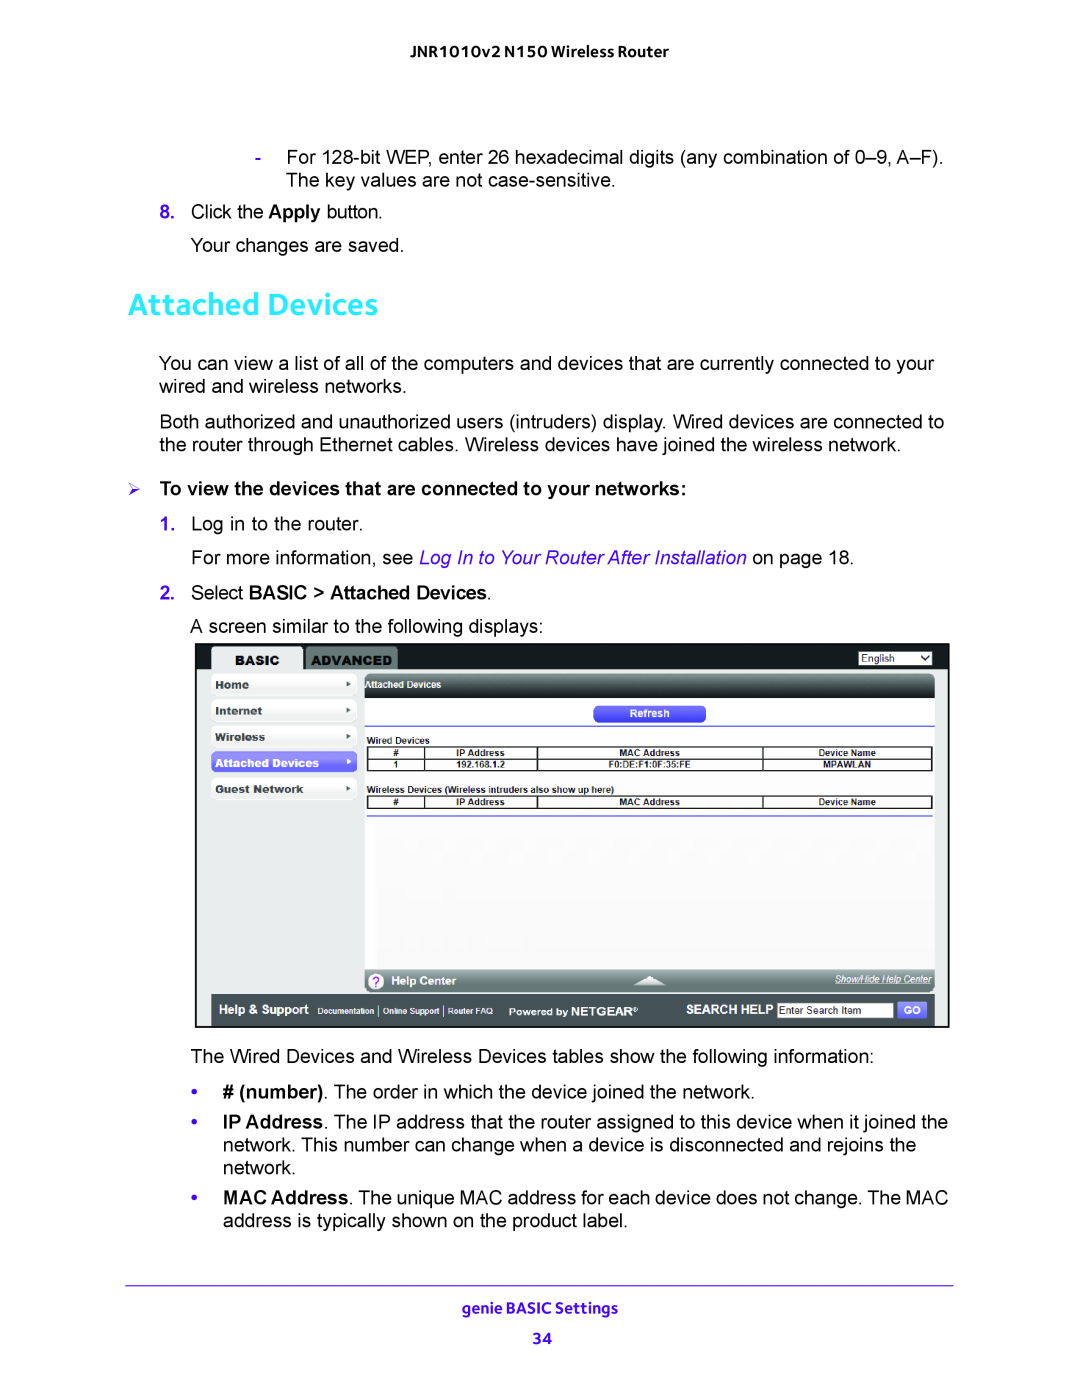 NETGEAR JNR1010V2 user manual Attached Devices,  To view the devices that are connected to your networks 